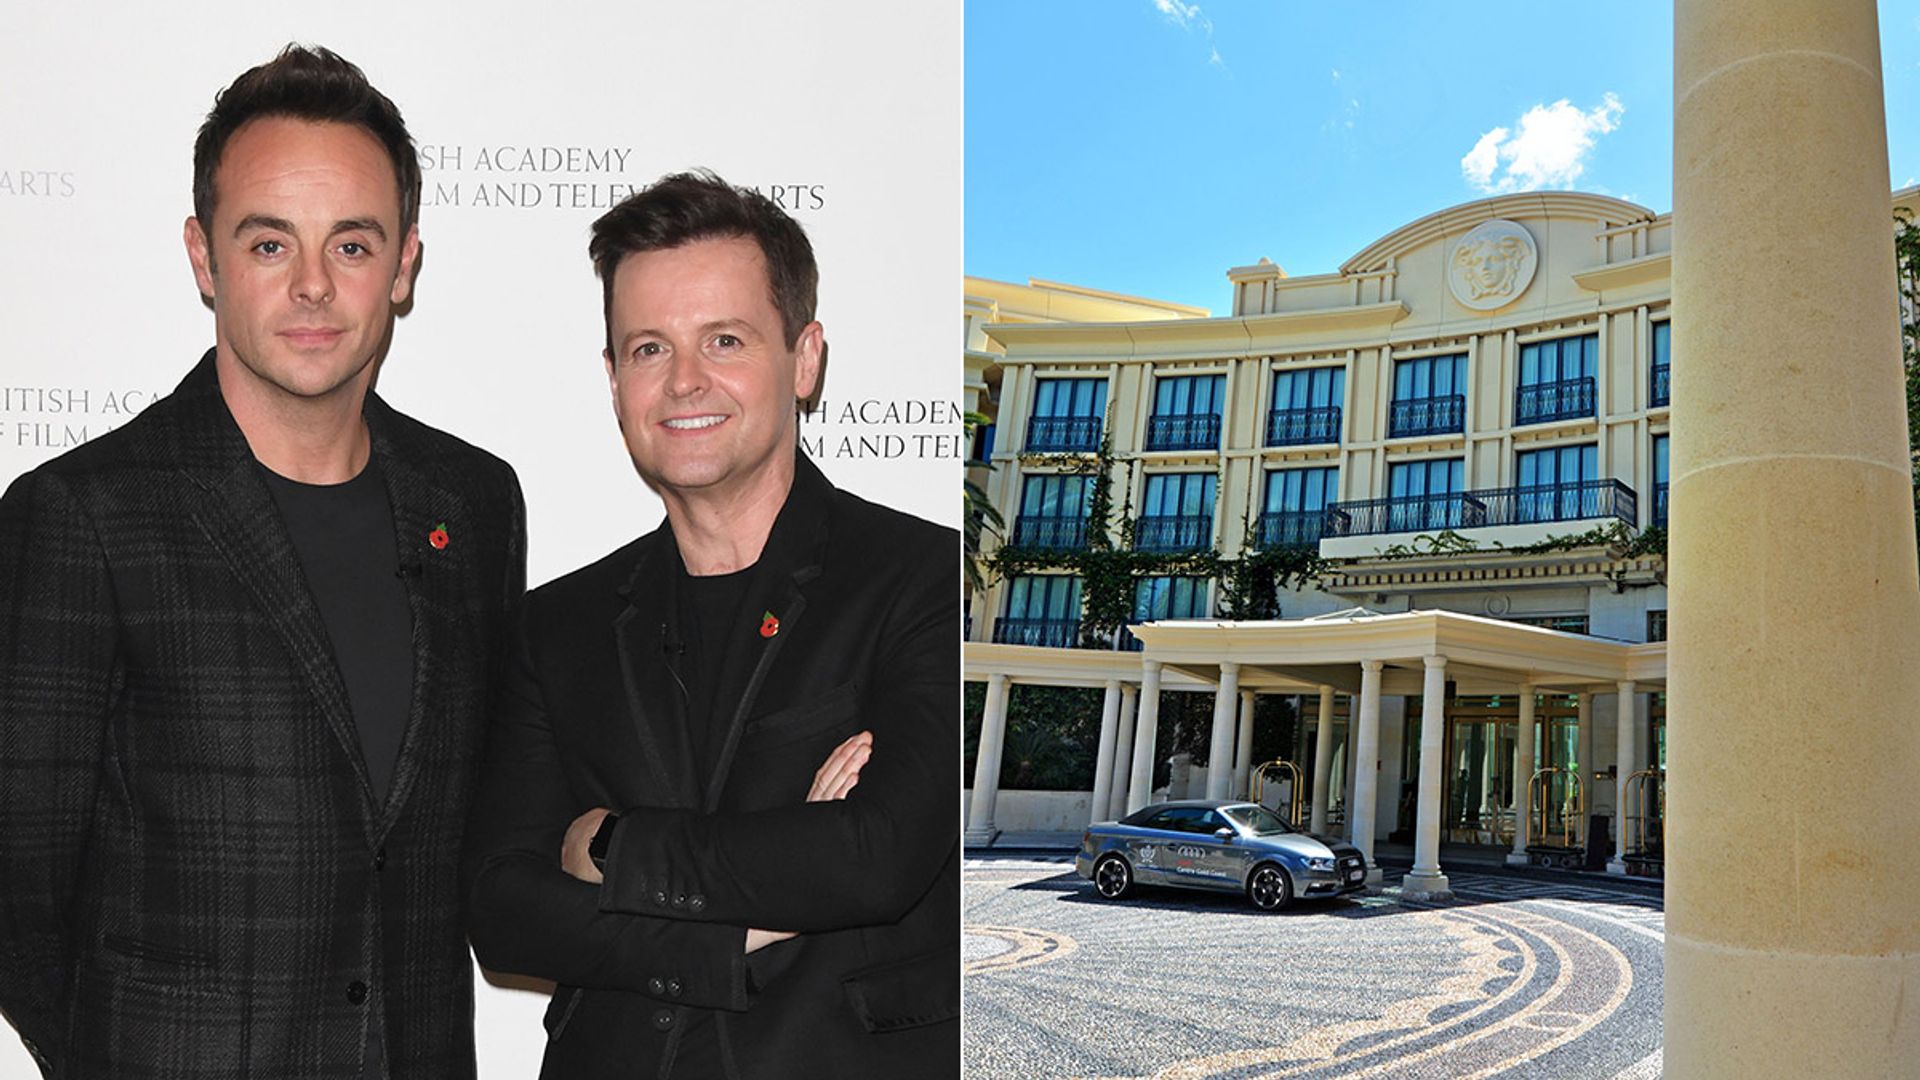 Where Ant & Dec stay on I'm a Celeb: Inside the £1800 per night Palazzo Versace